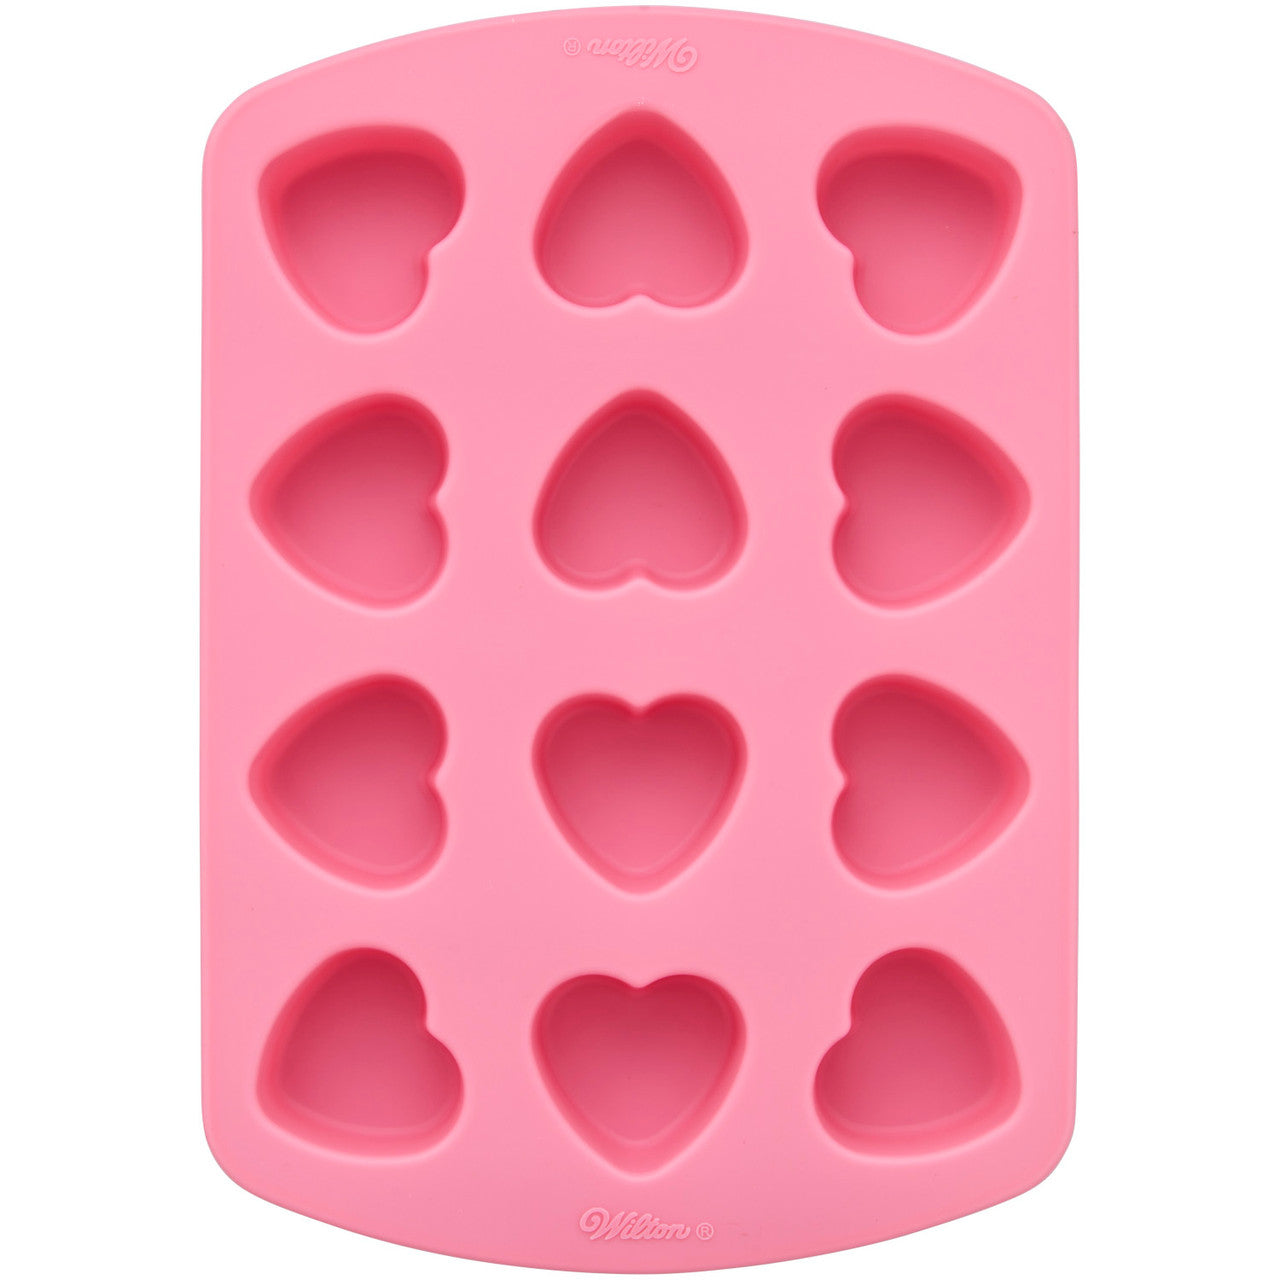 heart shaped silicone soap mold